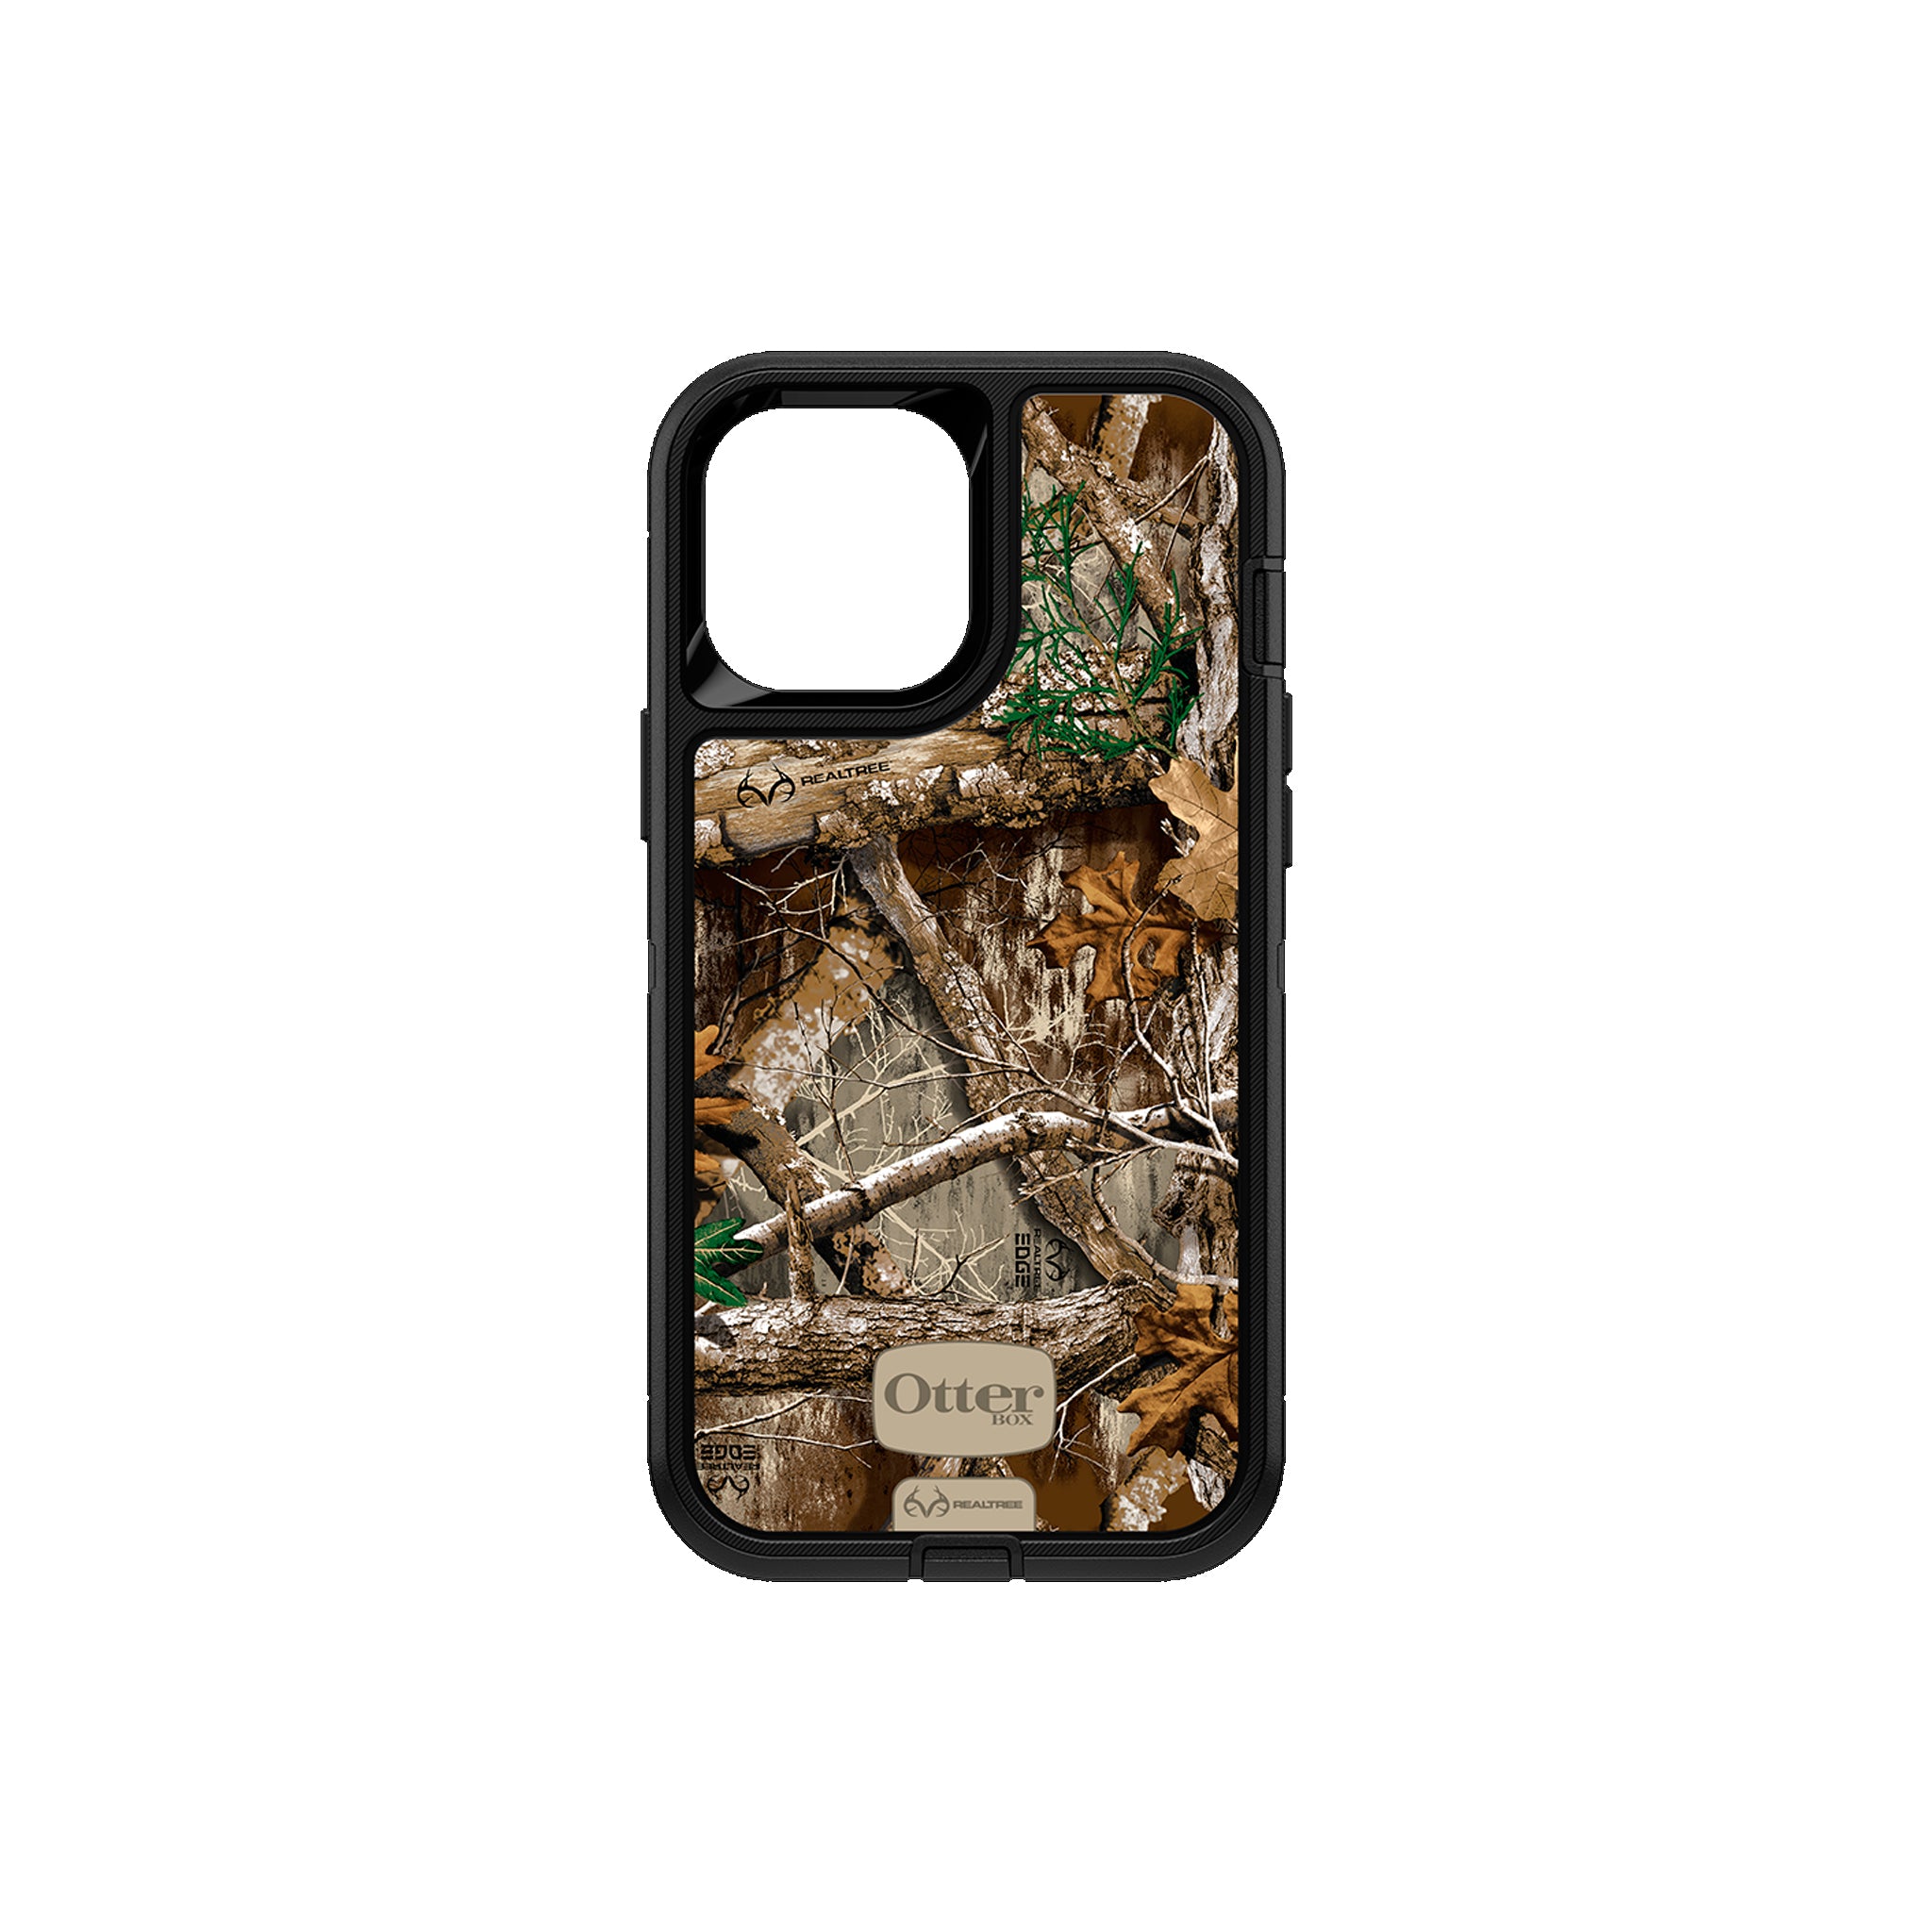 OtterBox - Defender for iPhone 12 Pro Max - RealTree Edge Black